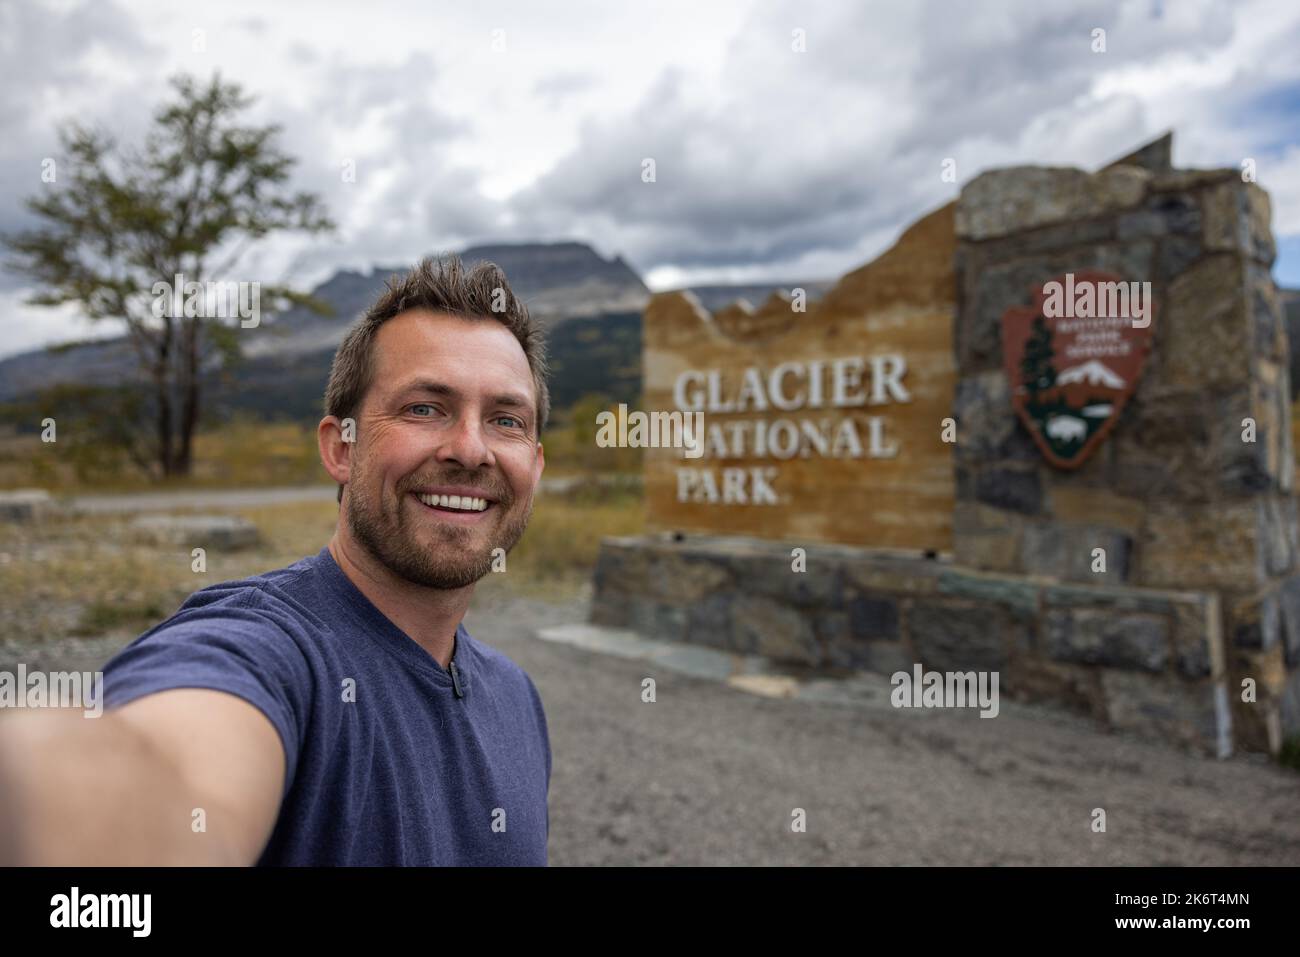 Person with a microphone clipped to his shirt taking a selfie in front of the east entrance sign for Glacier National Park Stock Photo